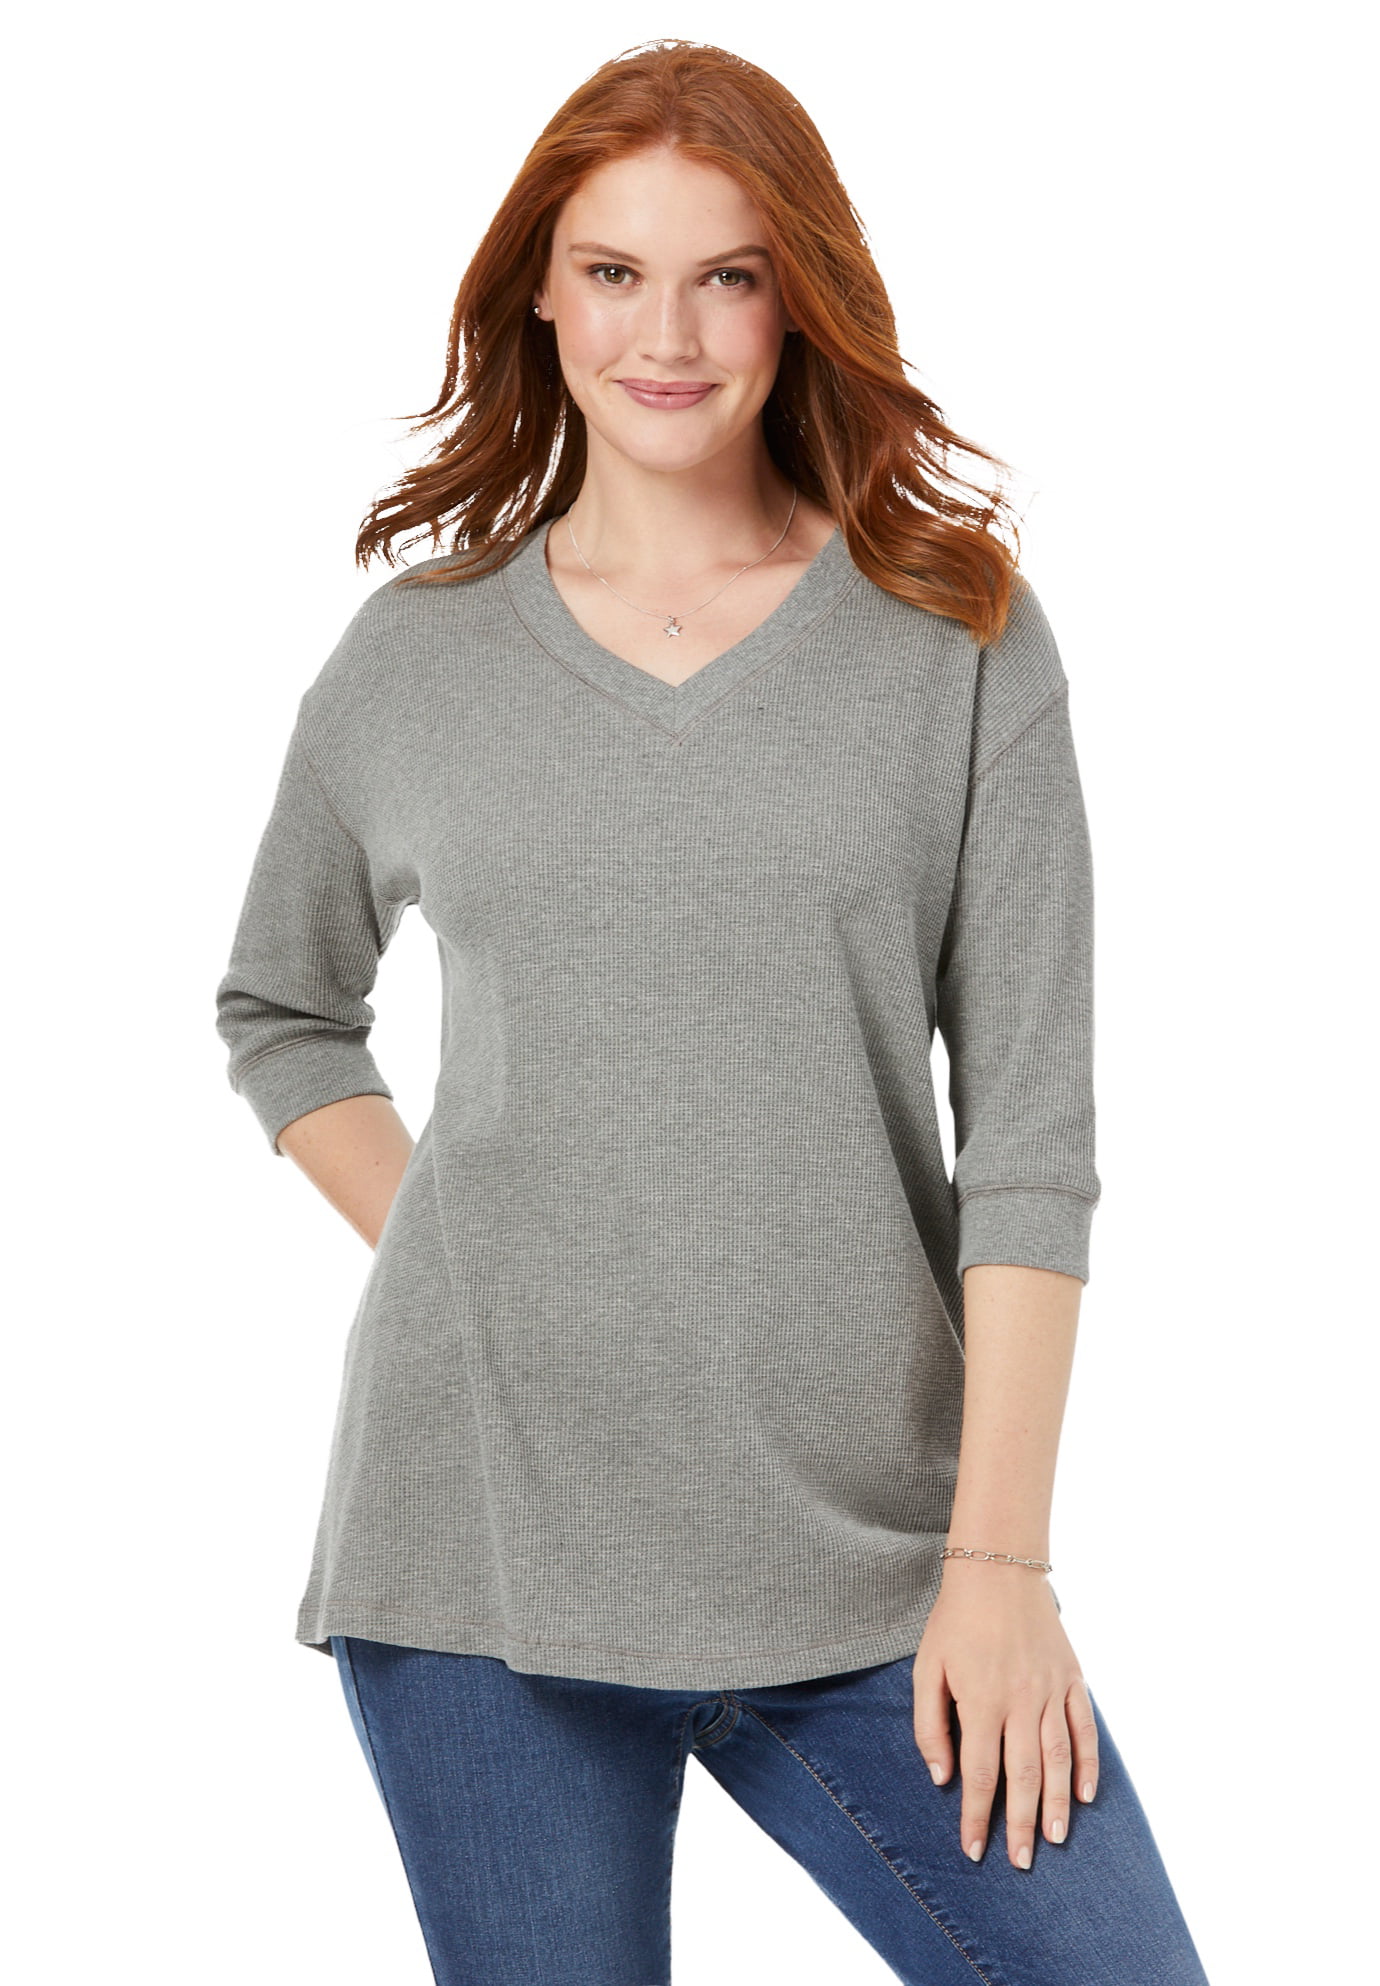 Woman Within Womens Plus Size Thermal Sweatshirt 